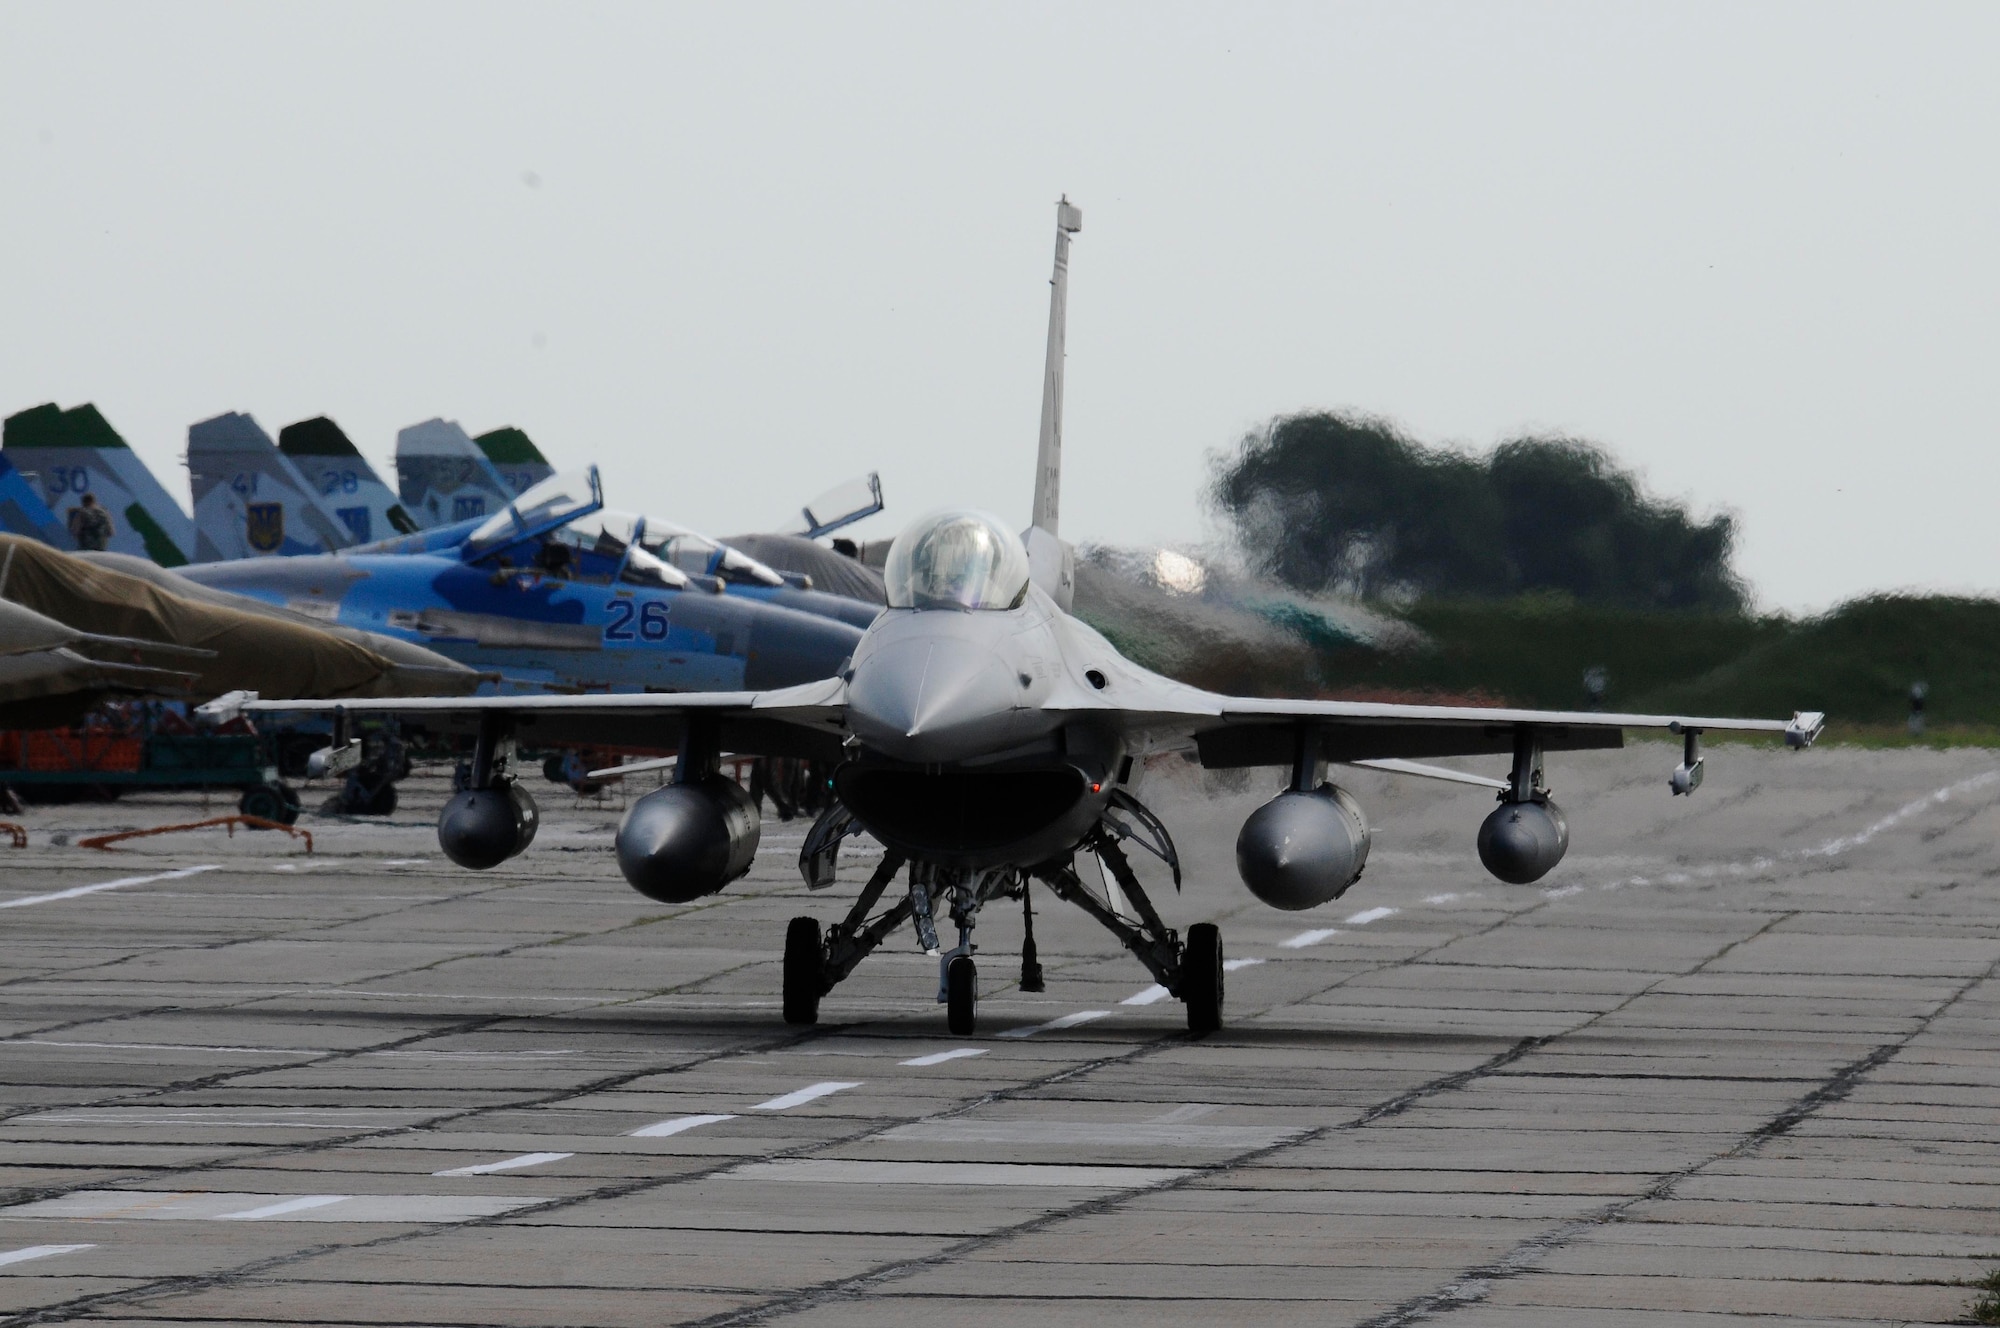 An F-16 Fighting Falcon from the Alabama Air National Guard taxis on the ramp at Mirgorod Air Base, Ukraine, July 16, 2011, passing Ukrainian SU-27s and MIG-29s. The U.S. fighters arrived for SAFE SKIES 2011, a joint Ukraine, Poland and U.S. aerial exchange event. (U.S. Air Force photo/Tech. Sgt. Charles Vaughn)